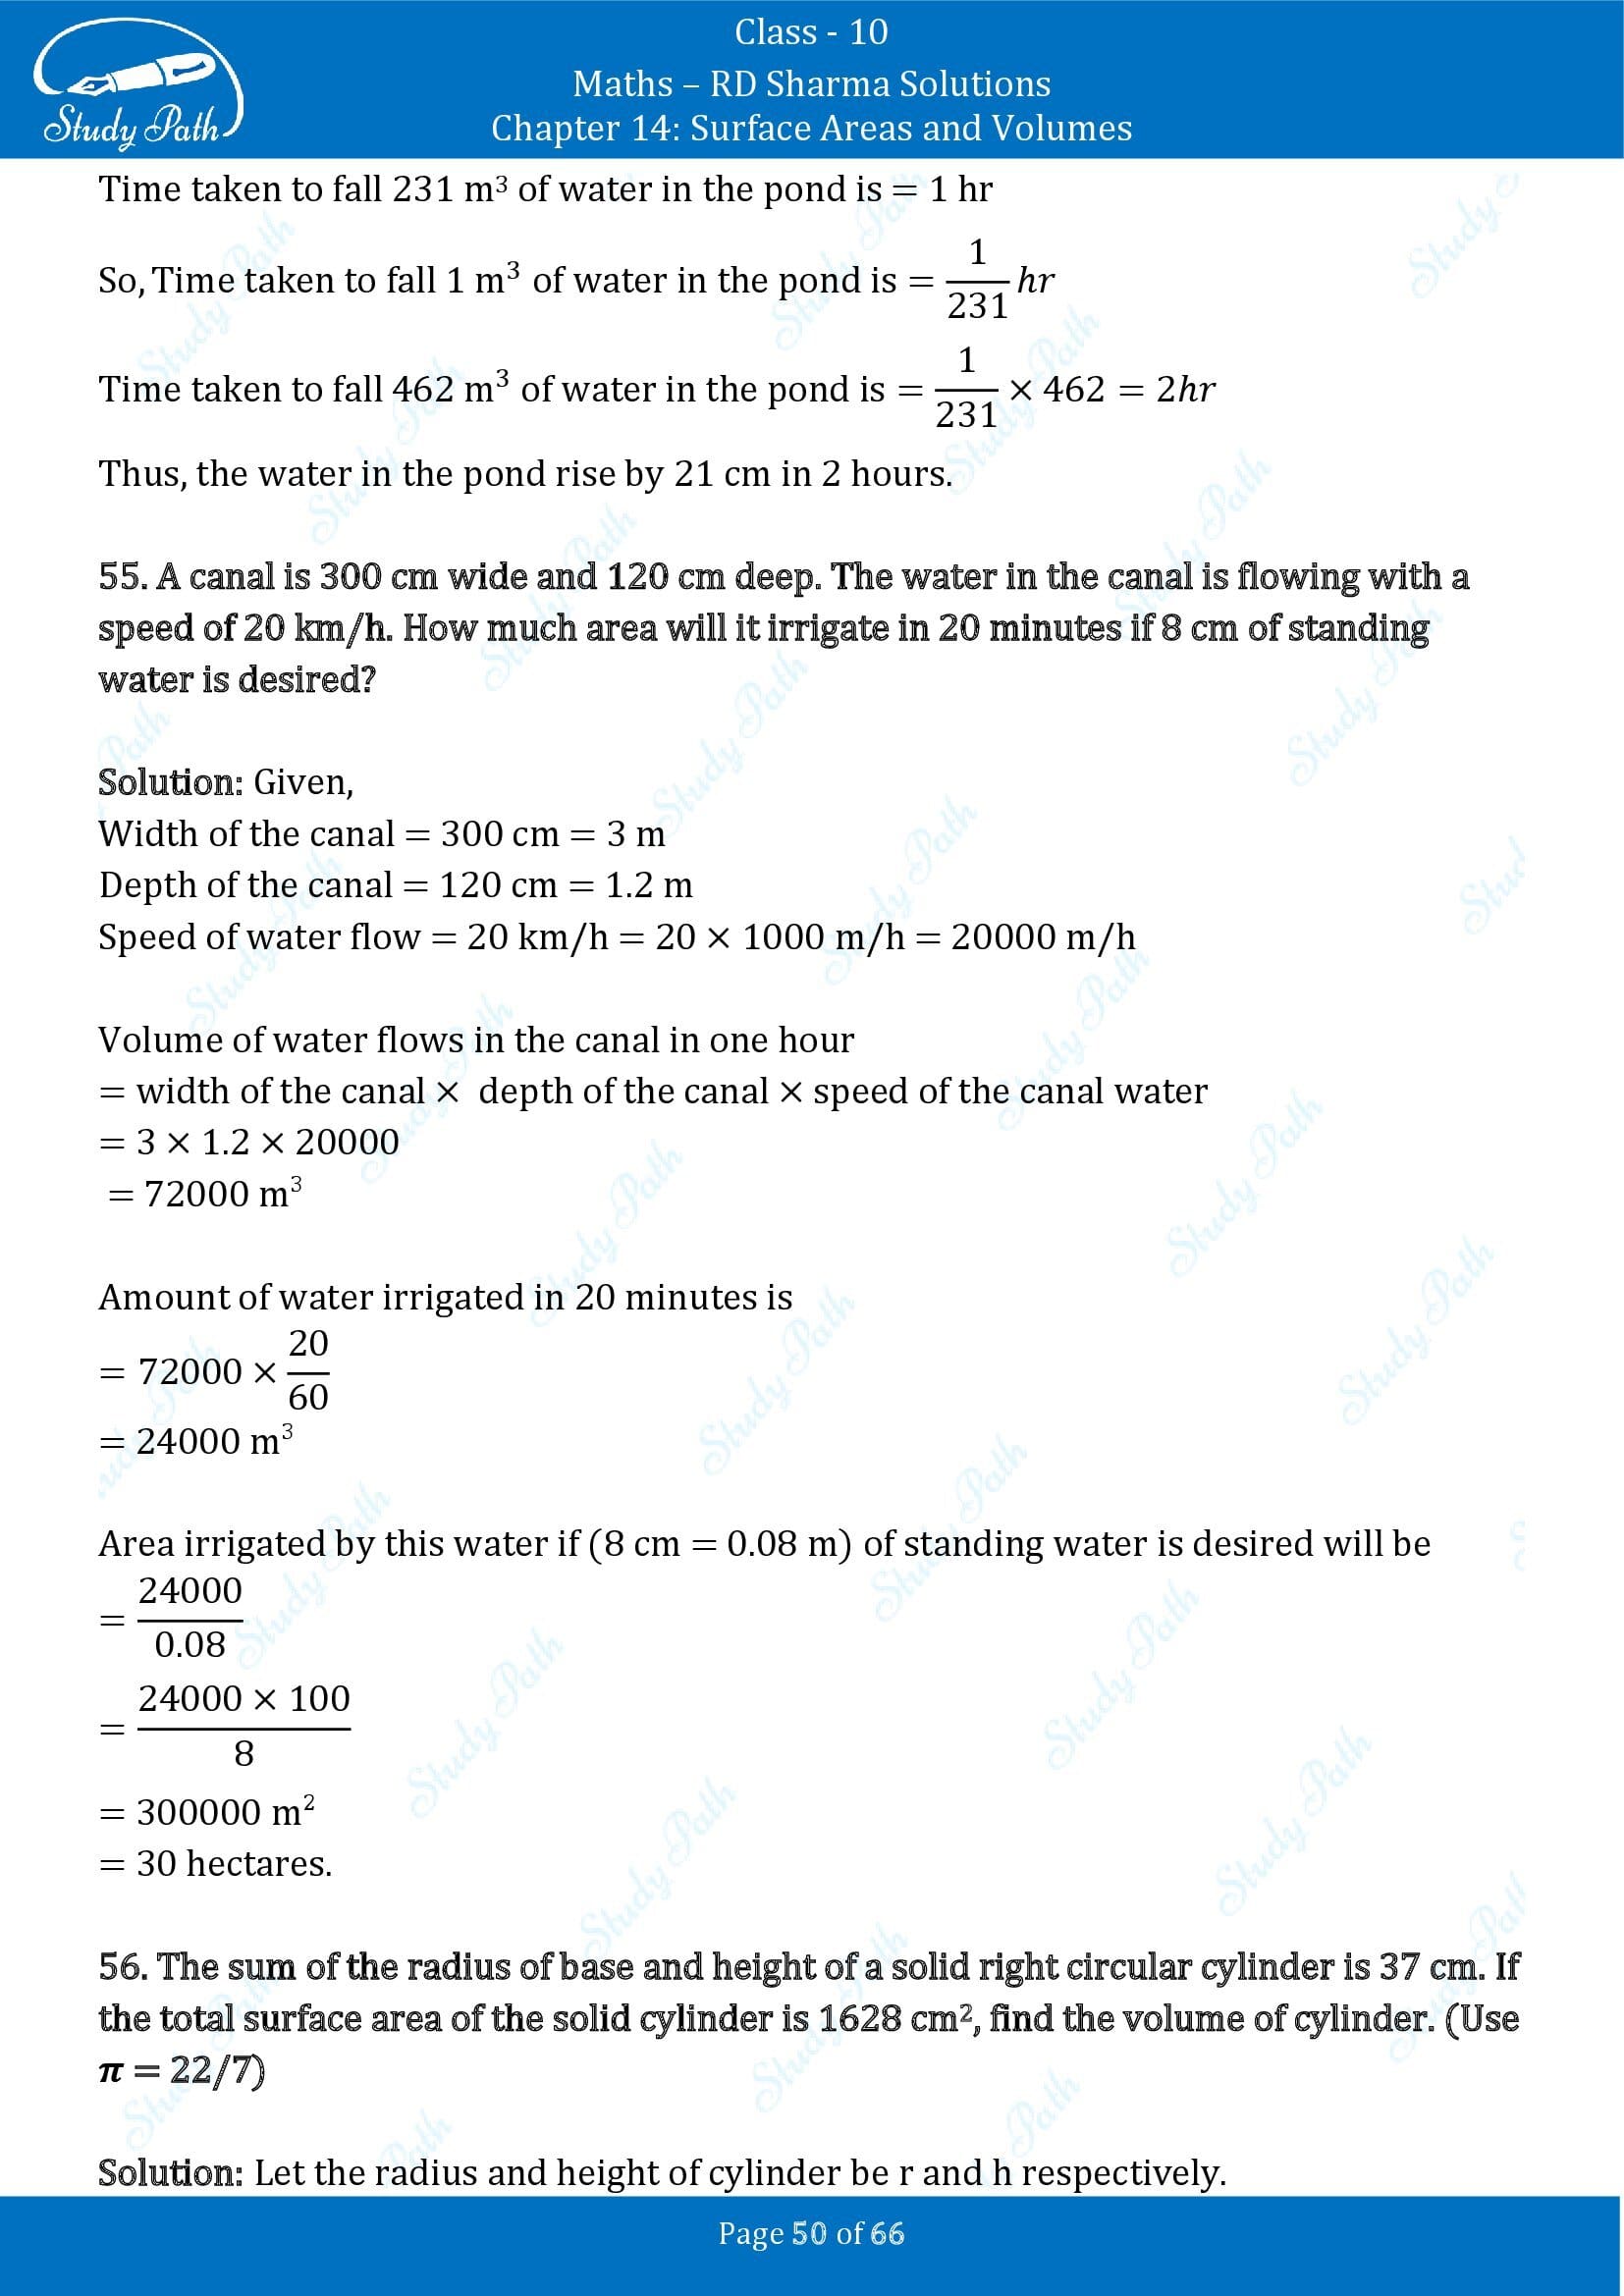 RD Sharma Solutions Class 10 Chapter 14 Surface Areas and Volumes Exercise 14.1 00050